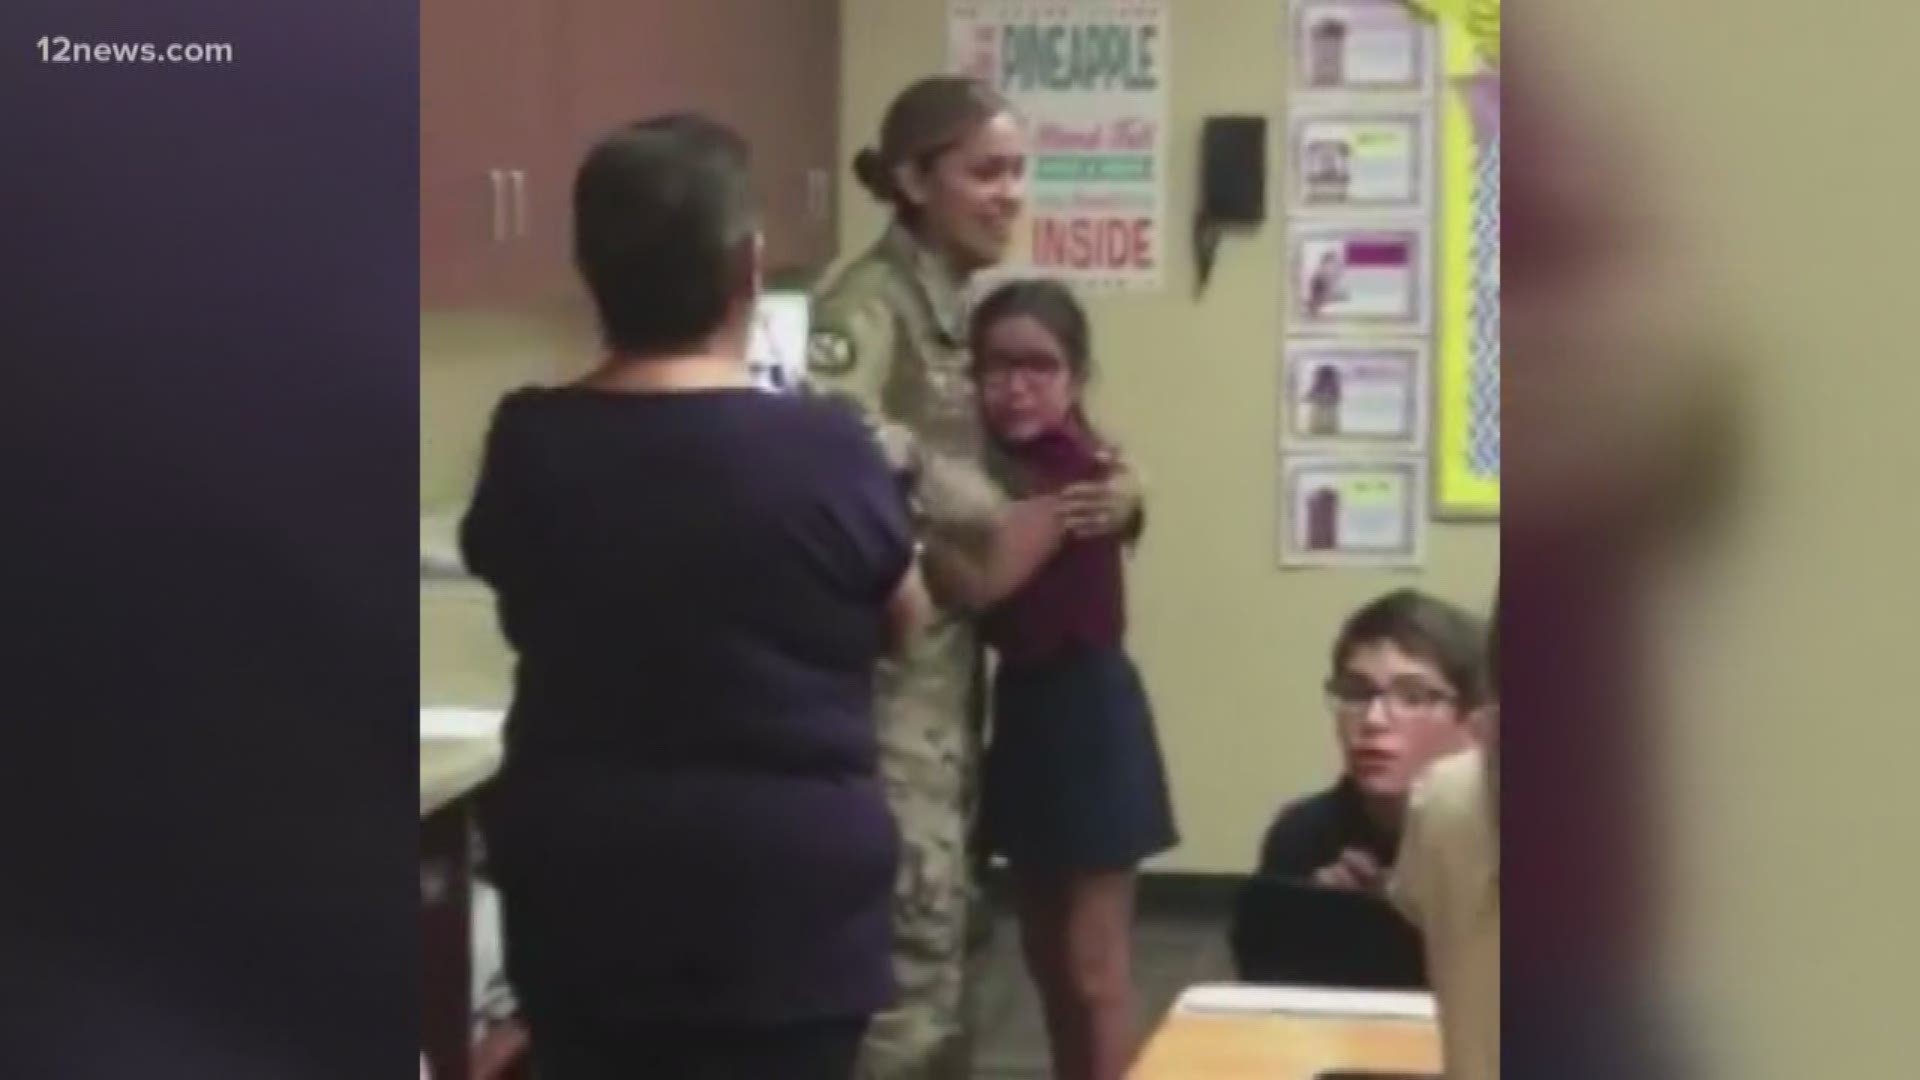 Air Force Master Sergeant Esmeralda McKenzie returned home from Iraq early and wanted to surprise her daughter on her first day of the third grade. Check out the emotional reunion!